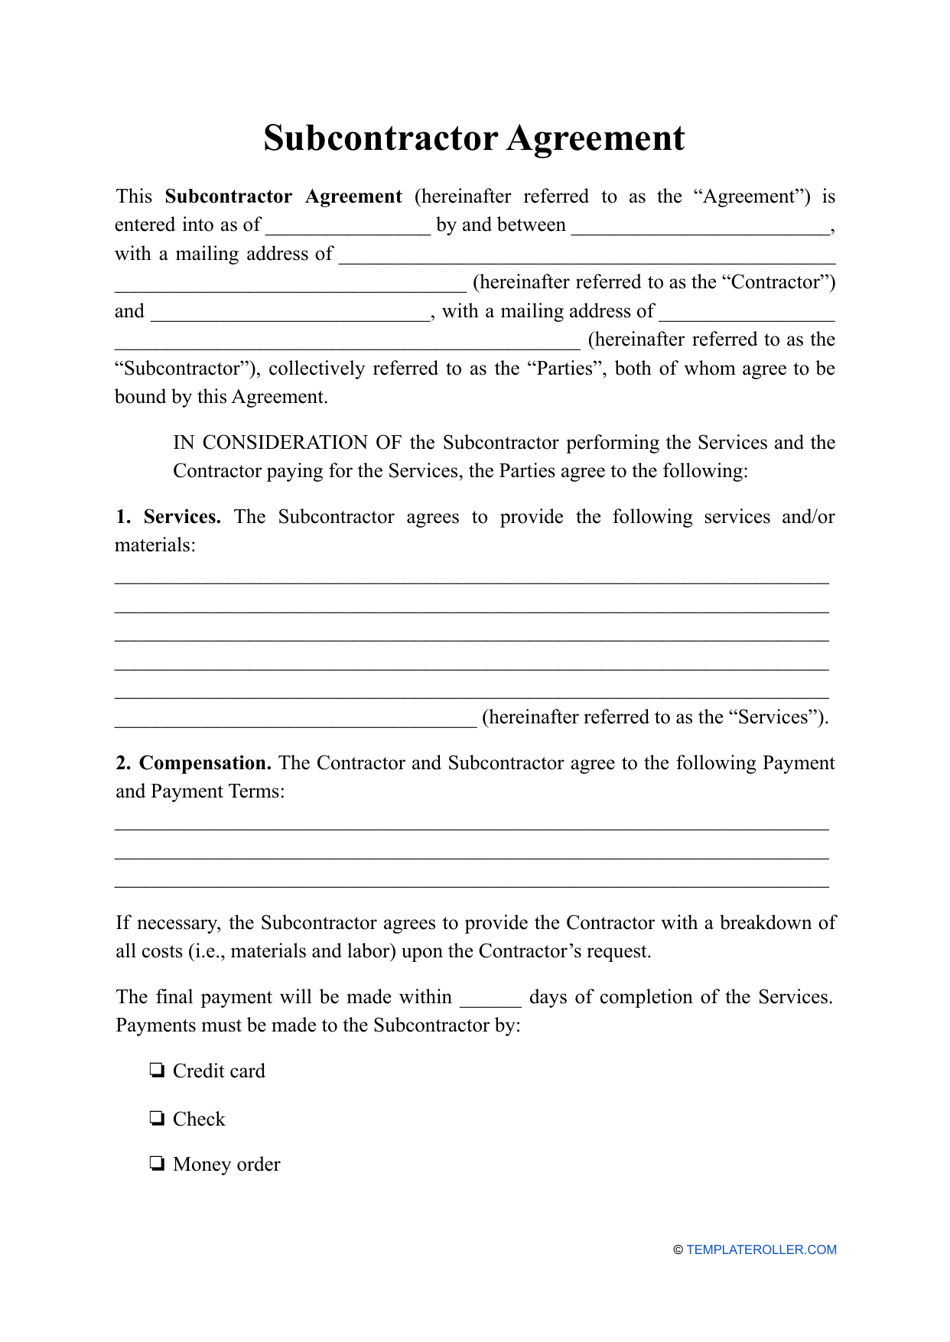 Subcontractor Agreement Template Fill Out, Sign Online and Download